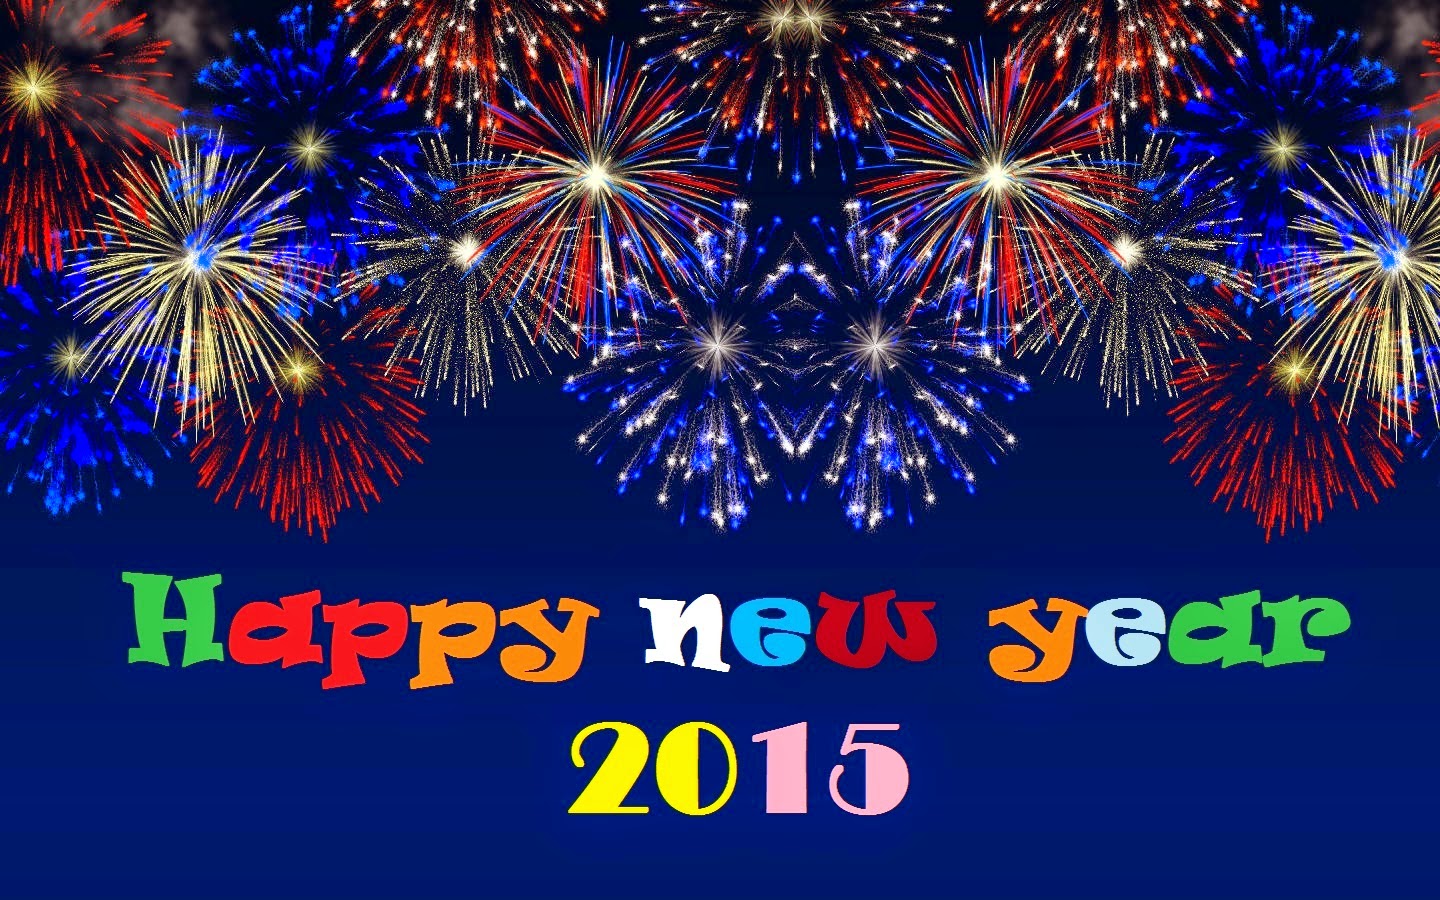 Happy New Year Winth Beautiful Fireworks Wallpaper With